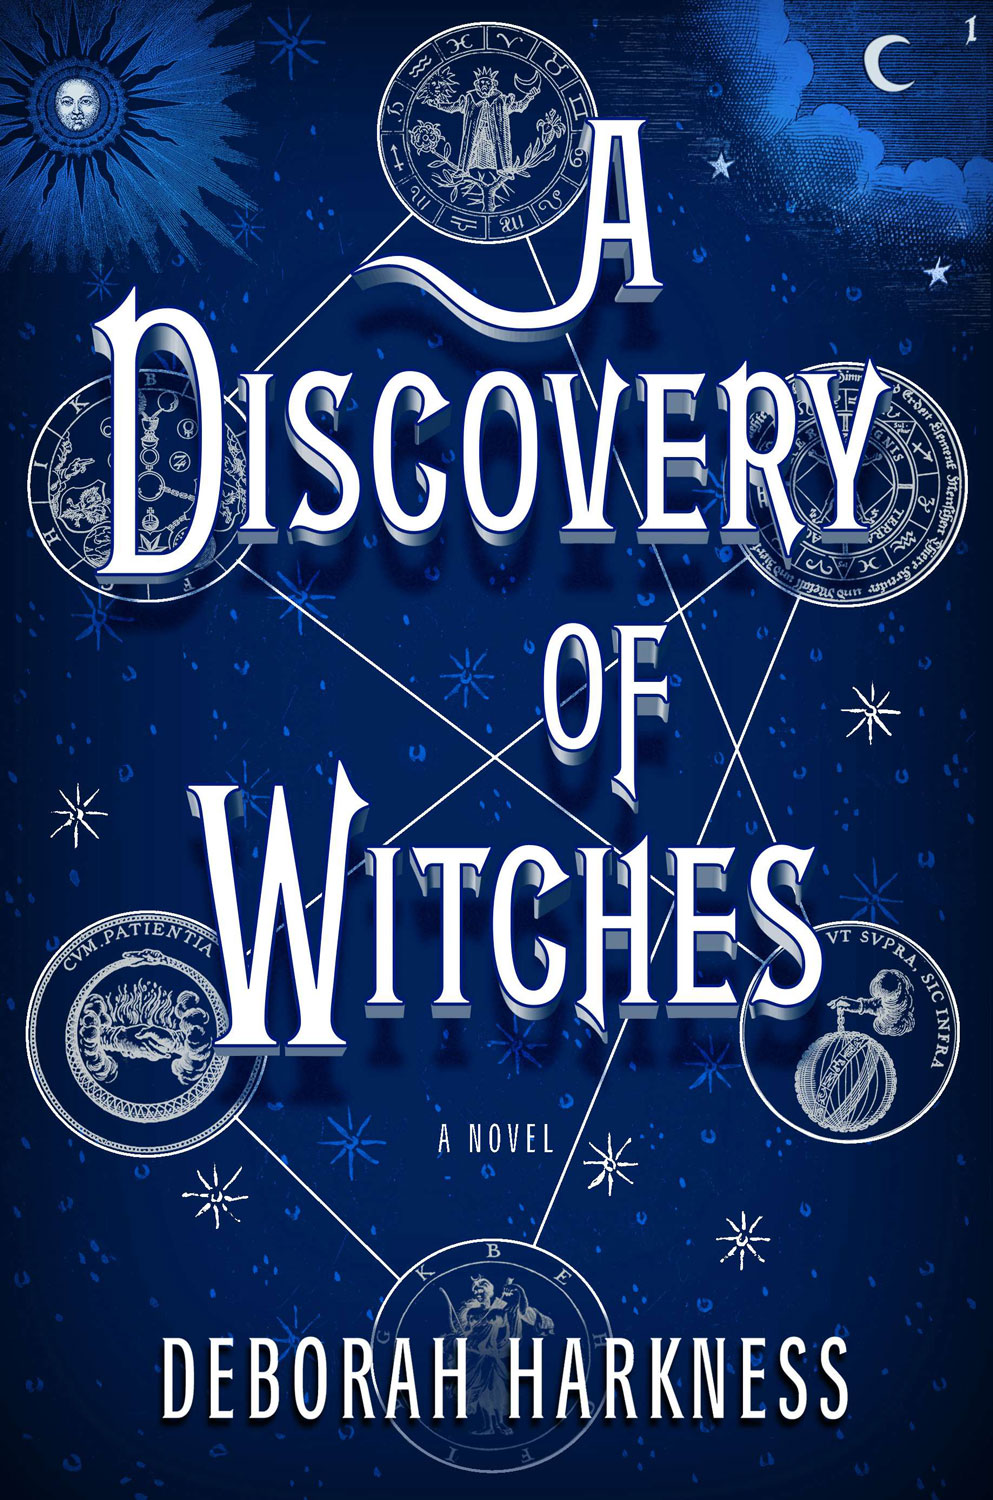 Deborah Harkness, A Discovery of Witches, All Souls Trilogy 1 (2011)